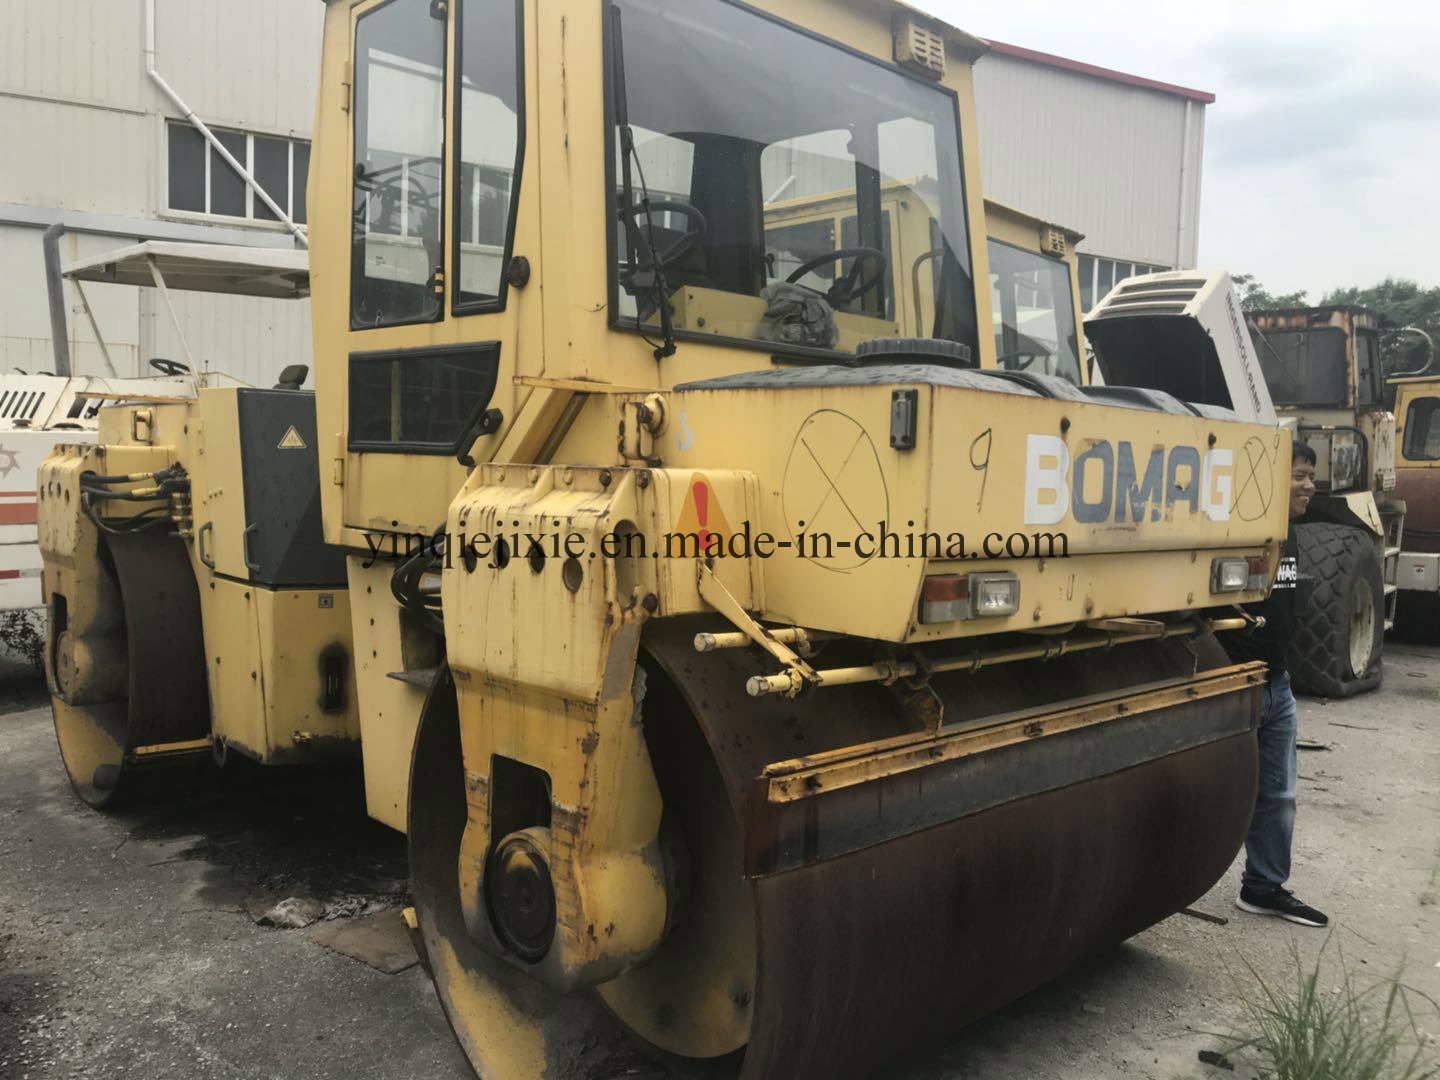 Used Original Bomag Bw202 Ad-2 Road Roller in Hot Sale with Lowest Price